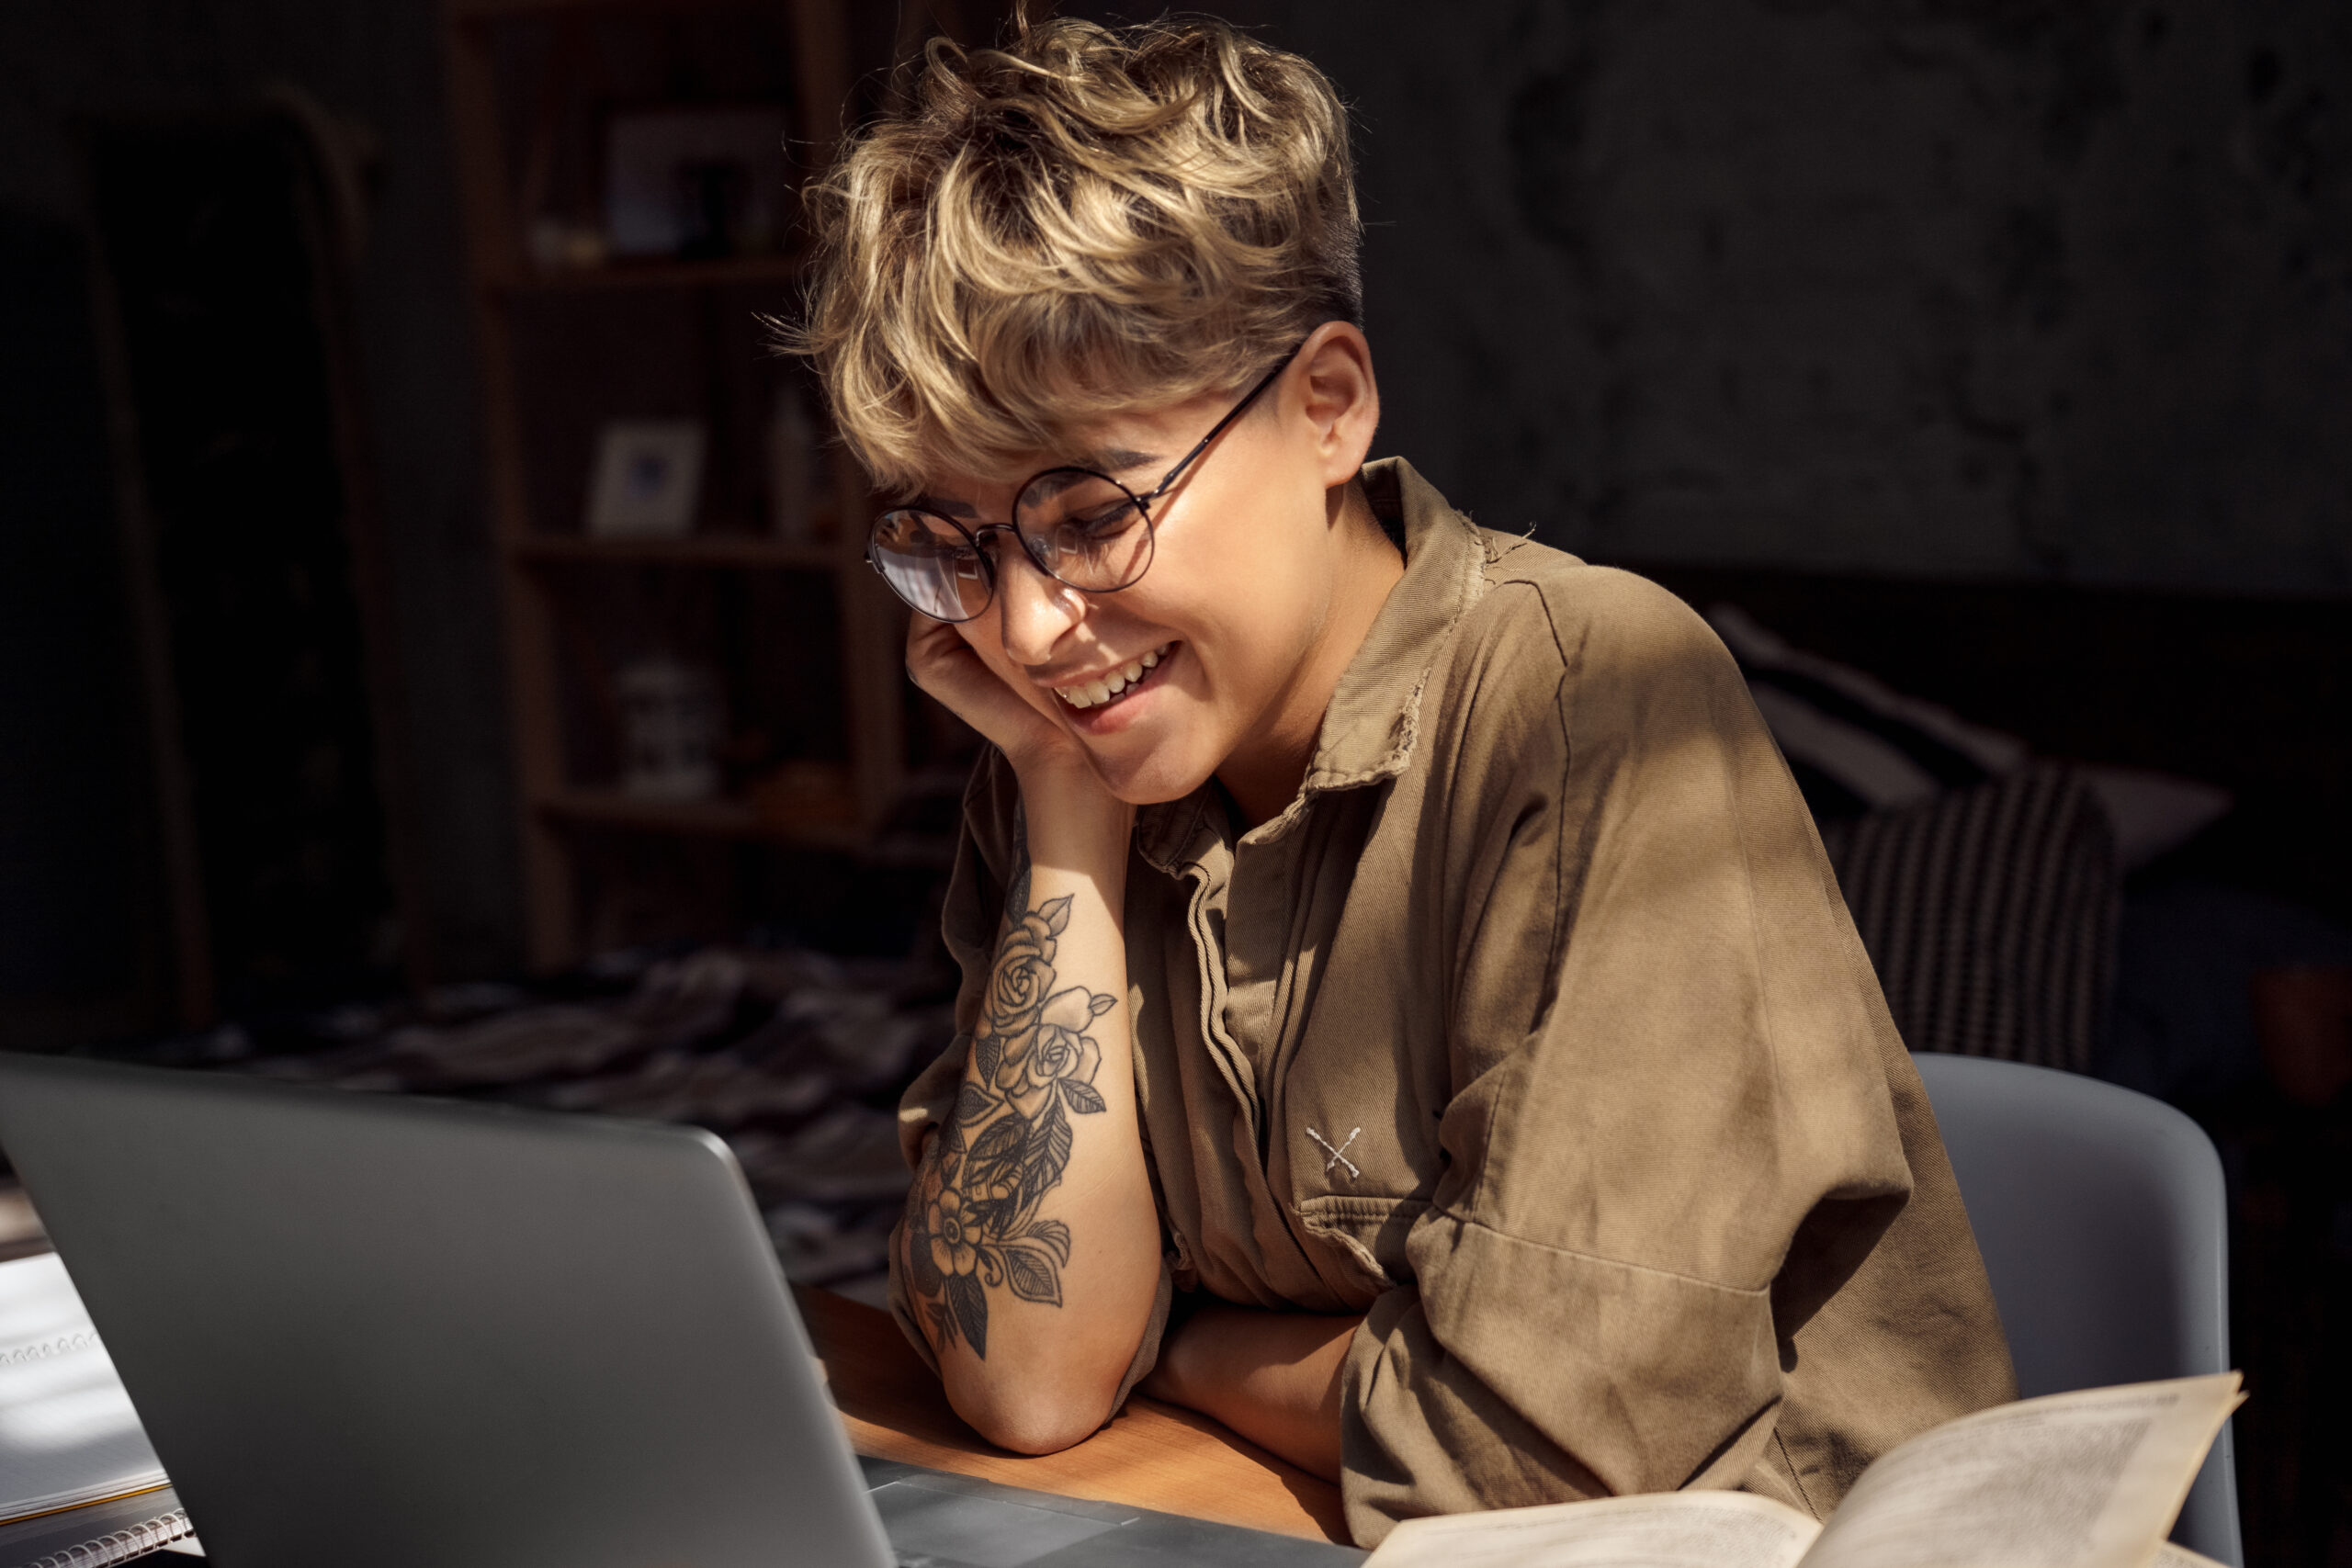 Young woman with short hair and glasses working on laptop